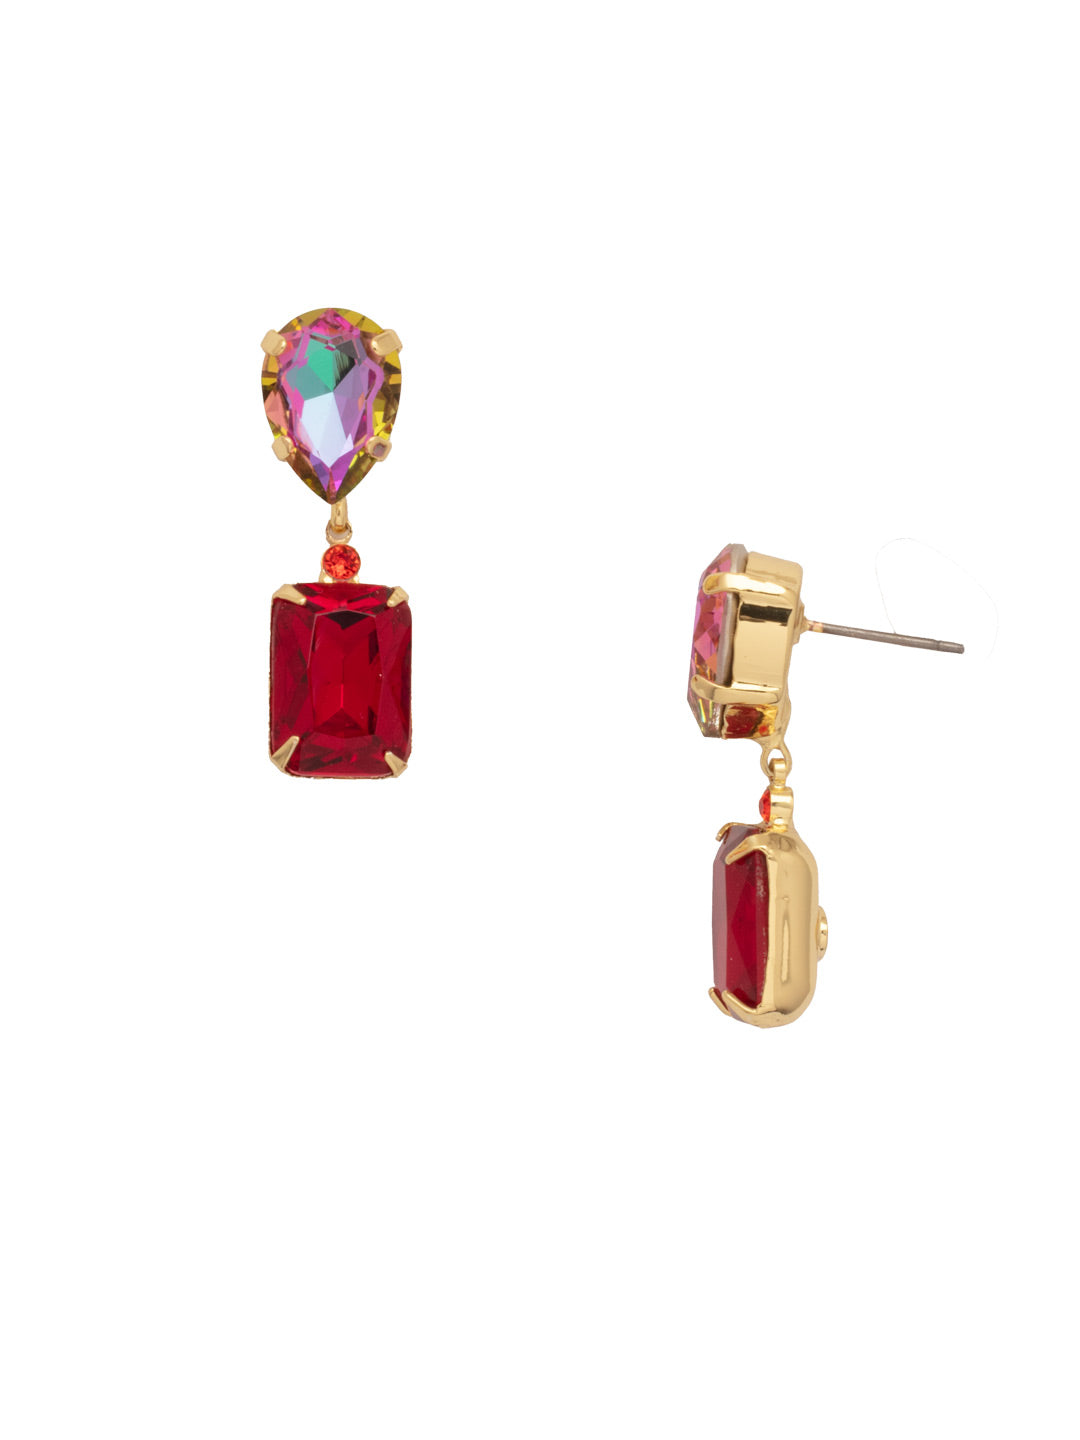 Emerald Pear Dangle Earrings - EFN4BGFIS - <p>The Emerald Pear Dangle Earrings feature a pear and emerald cut crystal dangling from a post. From Sorrelli's Fireside collection in our Bright Gold-tone finish.</p>